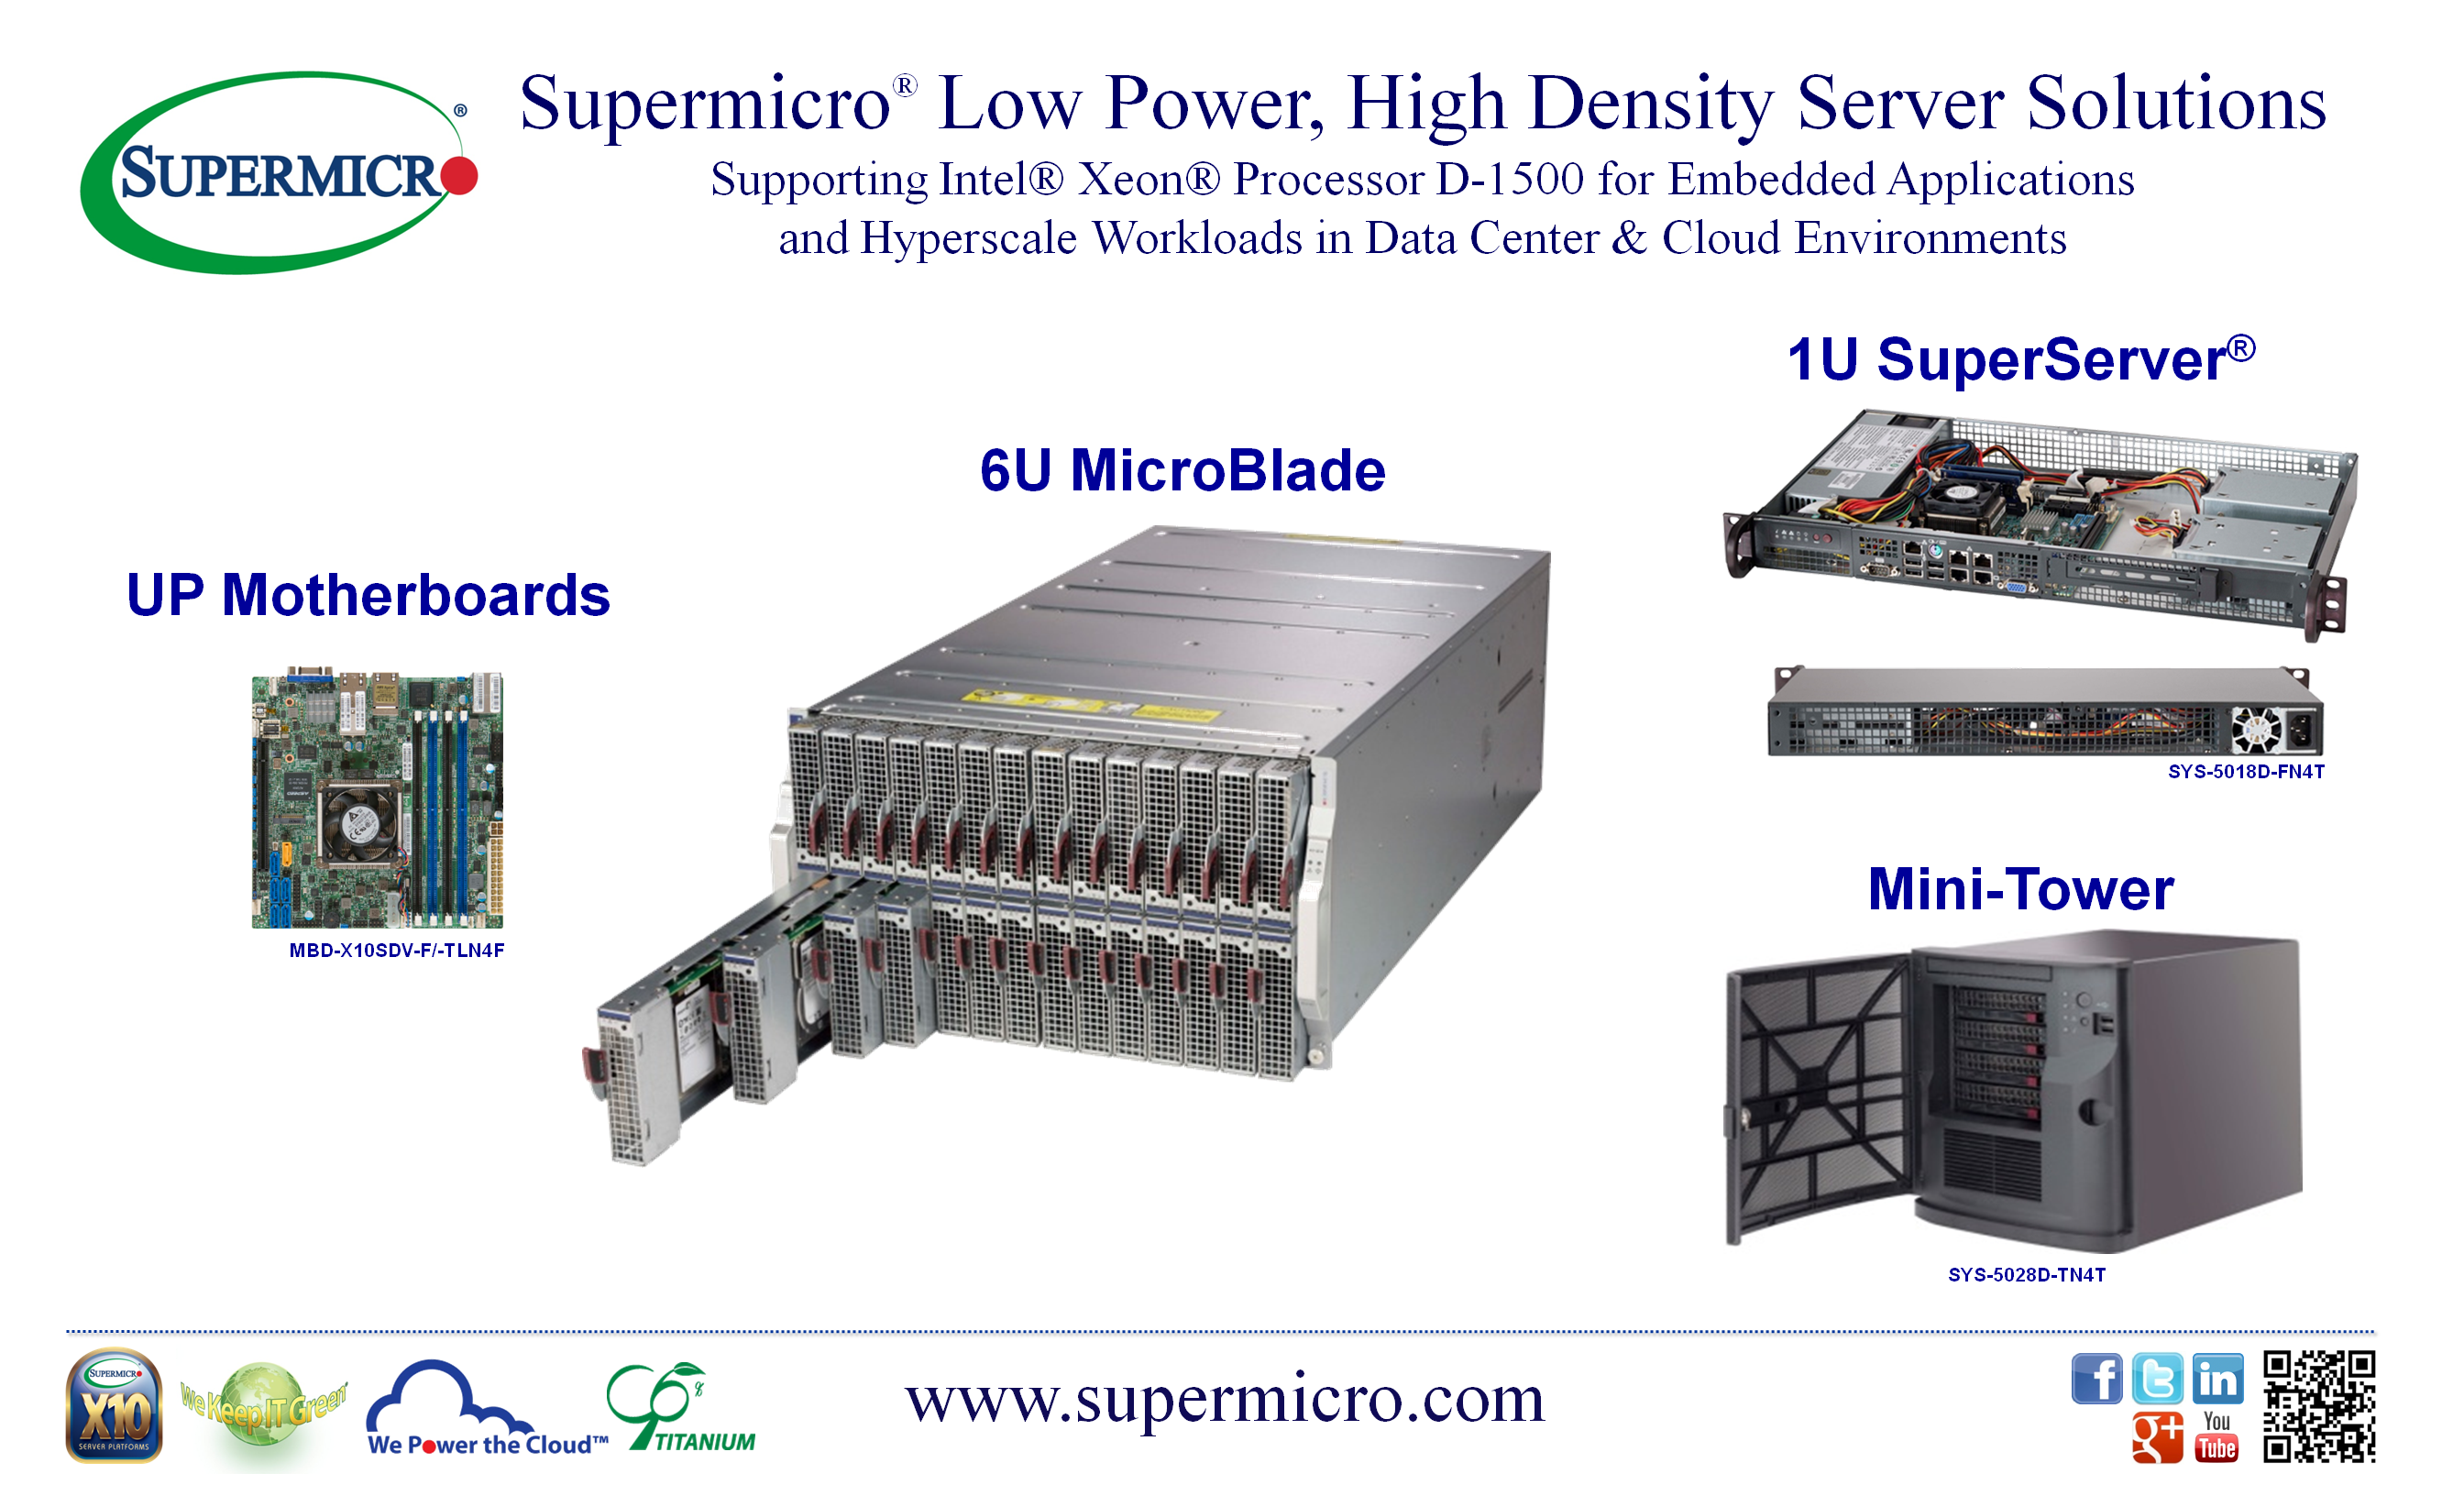 Supermicro Xeon D solutions